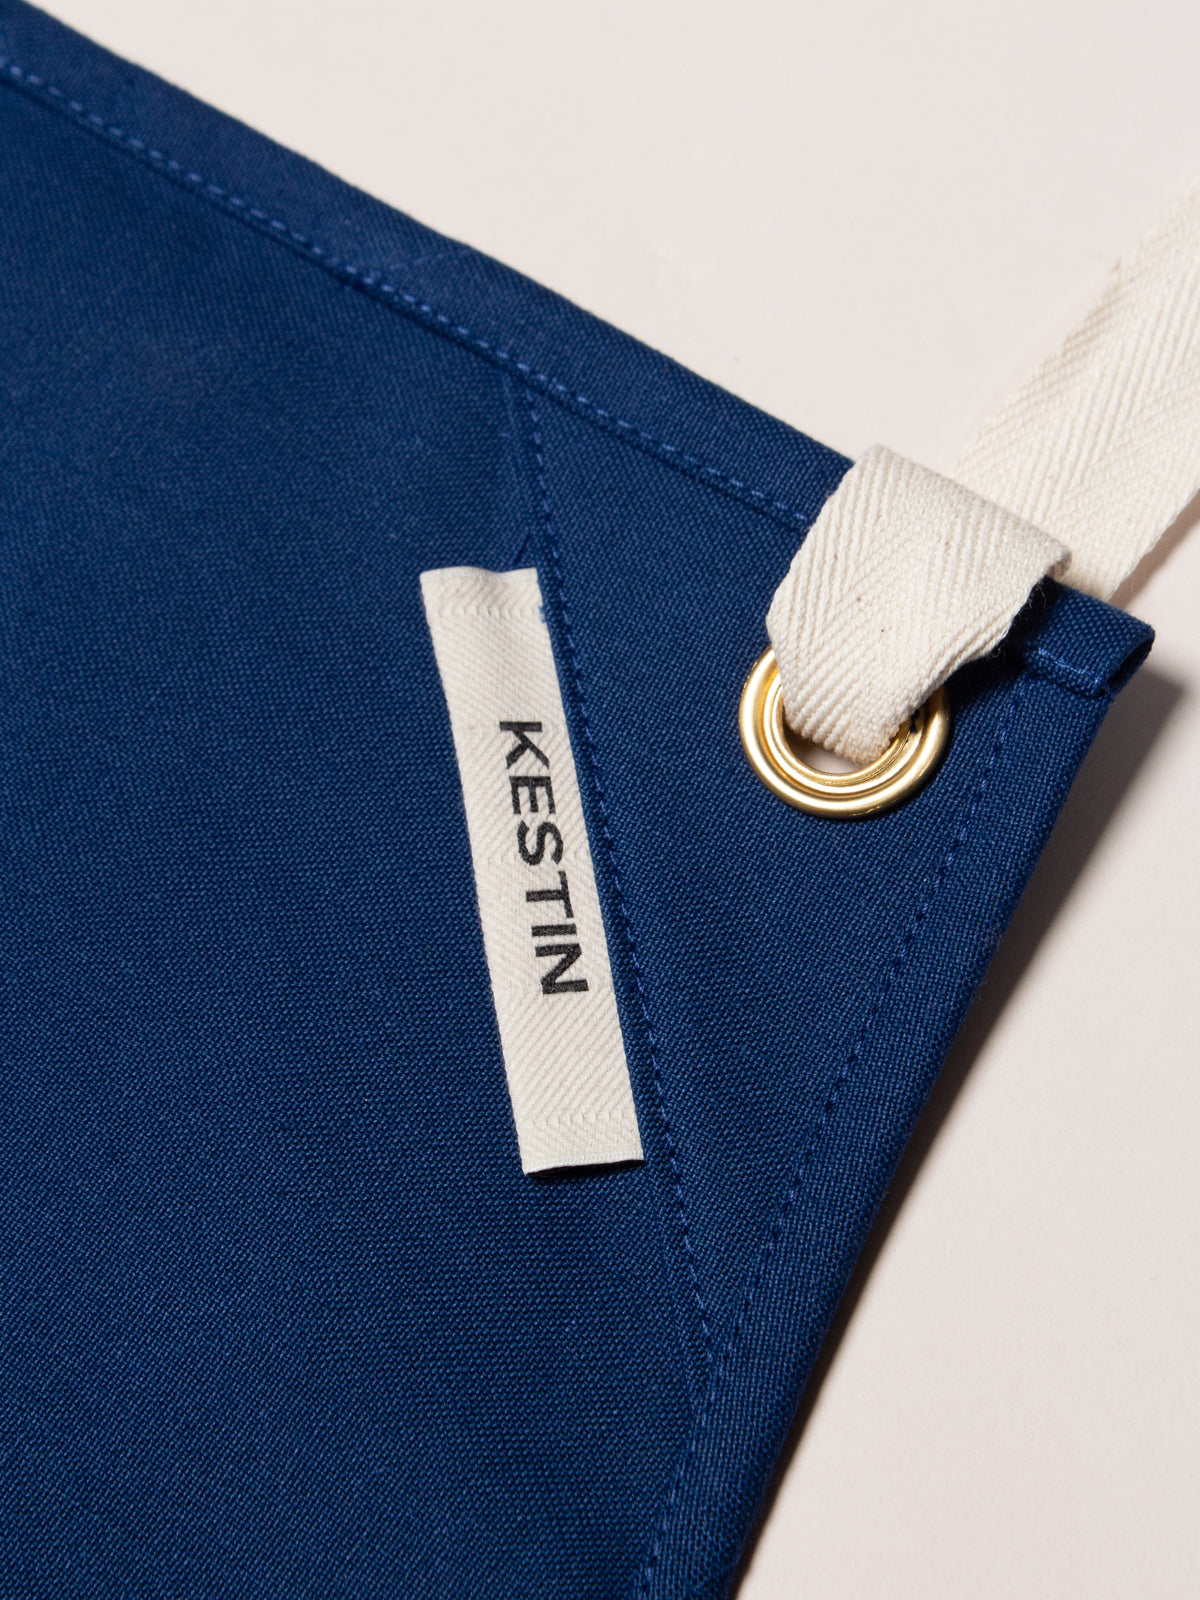 Neist Apron in French Navy